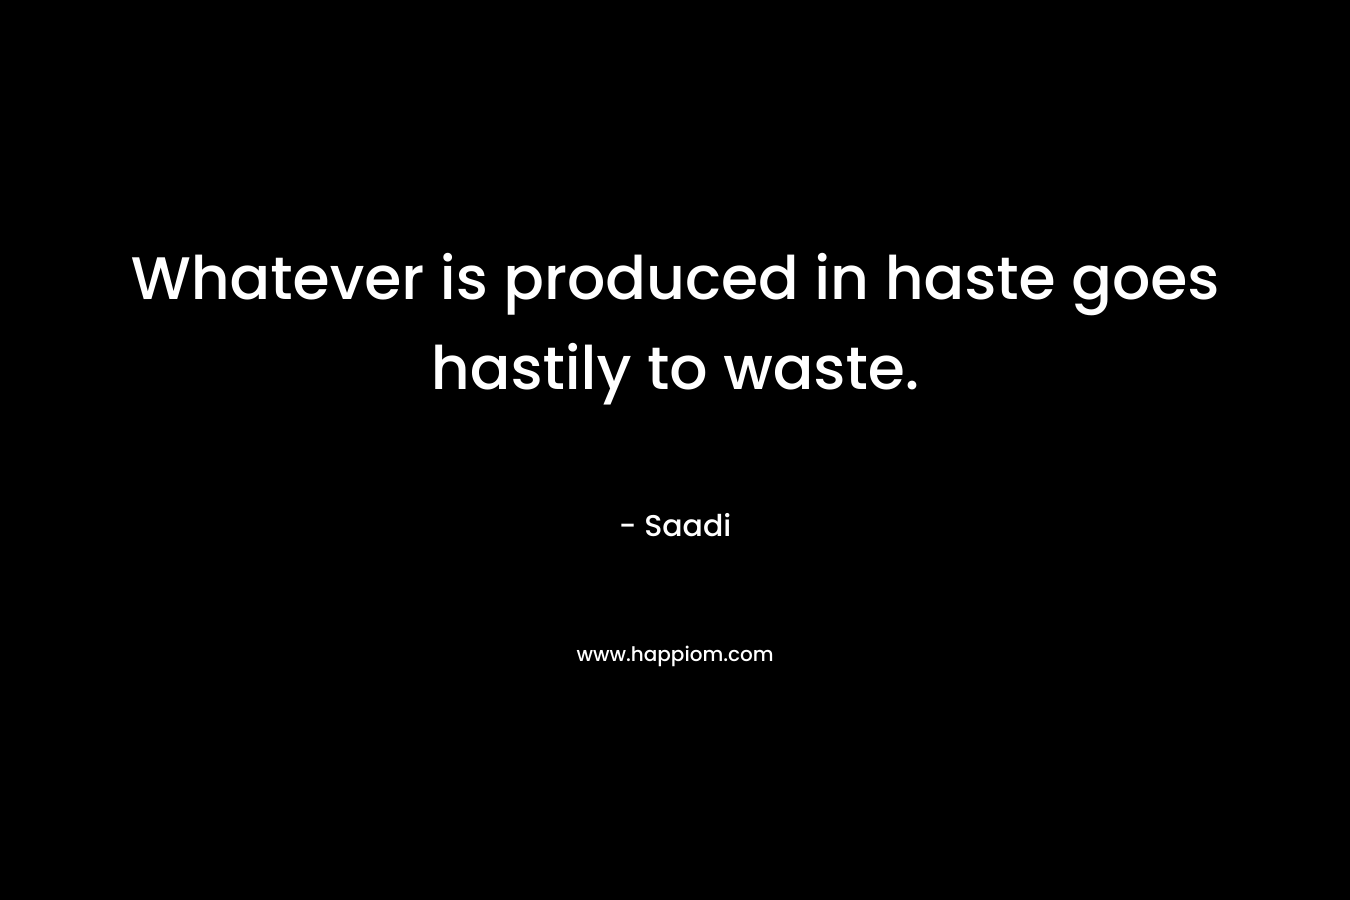 Whatever is produced in haste goes hastily to waste.